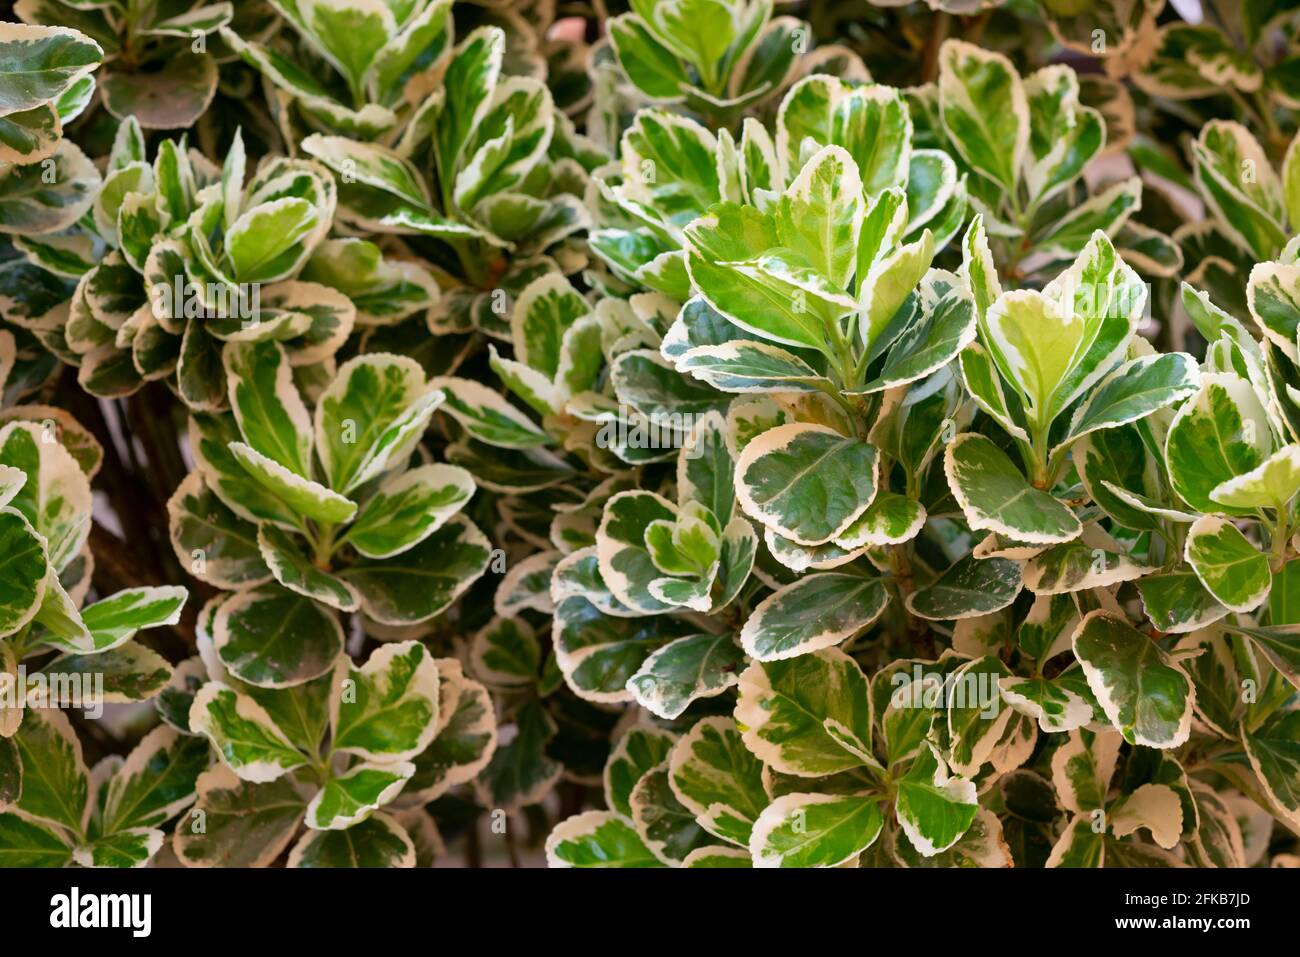 Euonymus Fortunei, Emerald Gaiety, Leaves Stock Photo